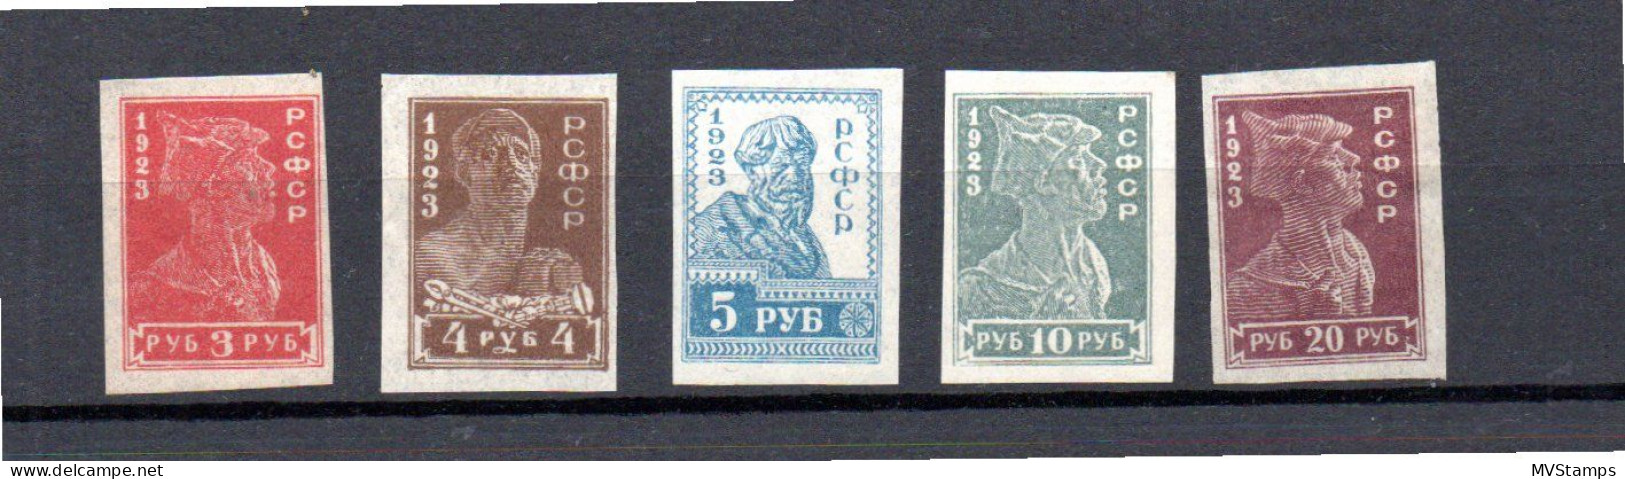 Russia 1923 Set Imperved Definitive Stamps (Michel 215/19 B) MLH - Gebraucht